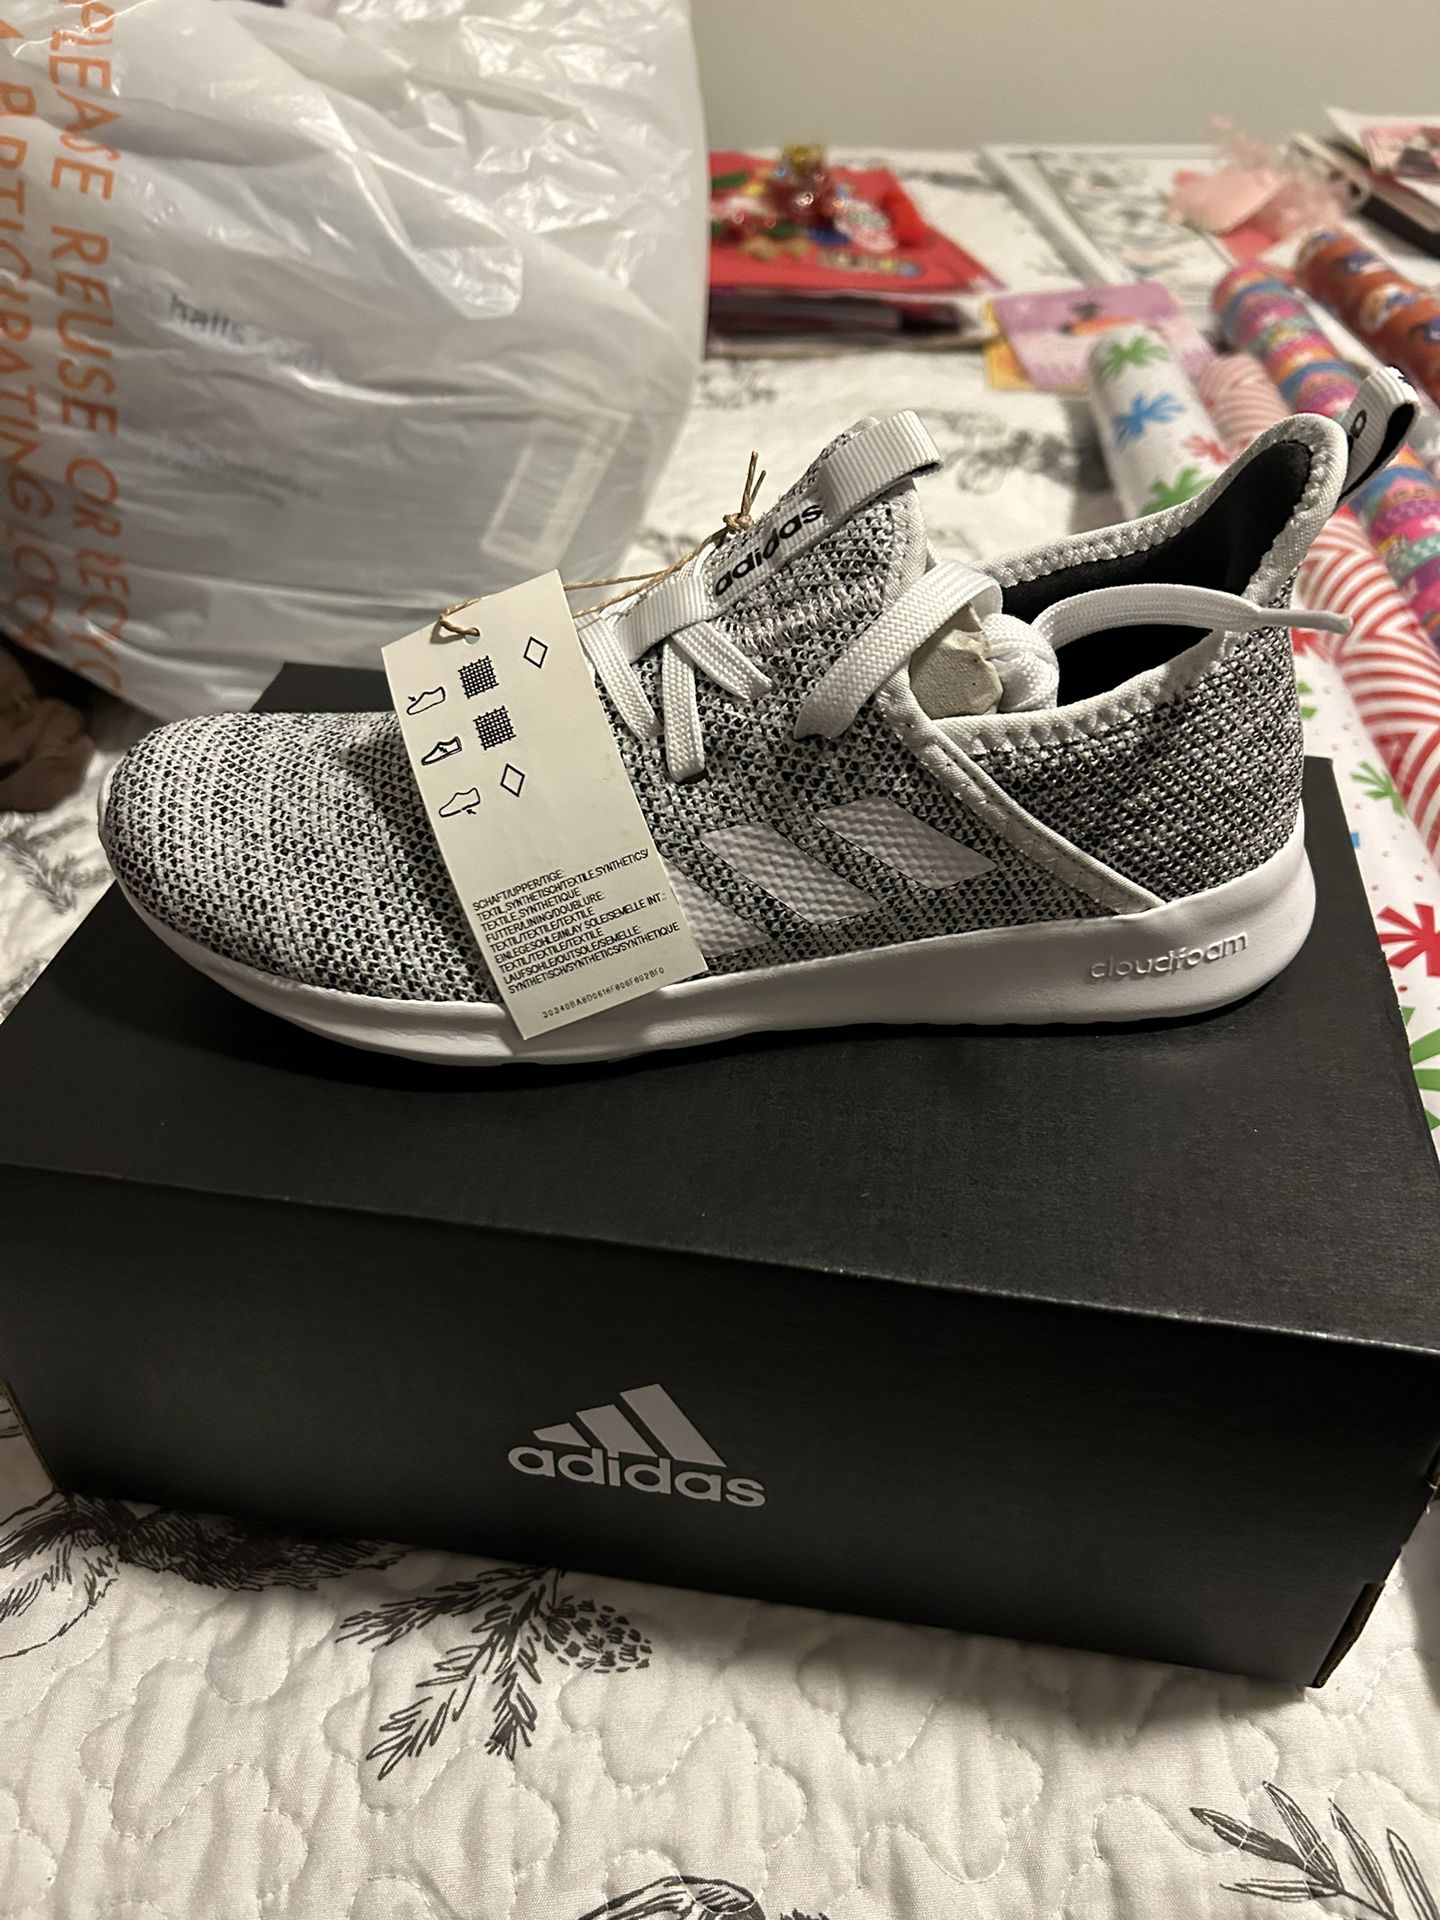 Brand New Women’s Adidas Shoes Size 6